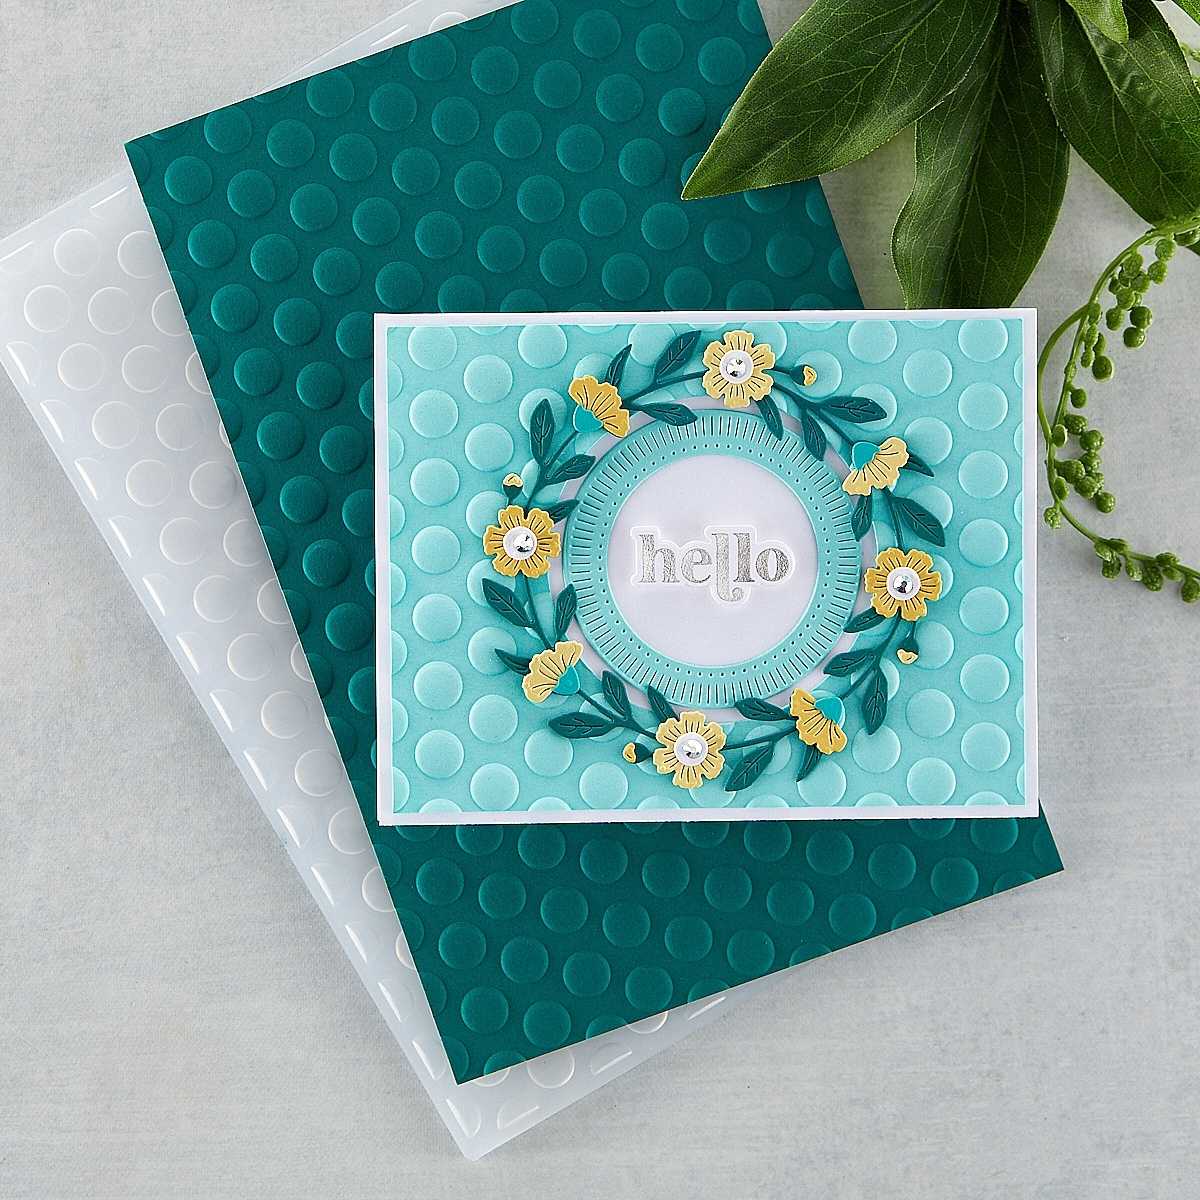 Embossing Folder Card Ideas - YOUR New Favorites to Make?